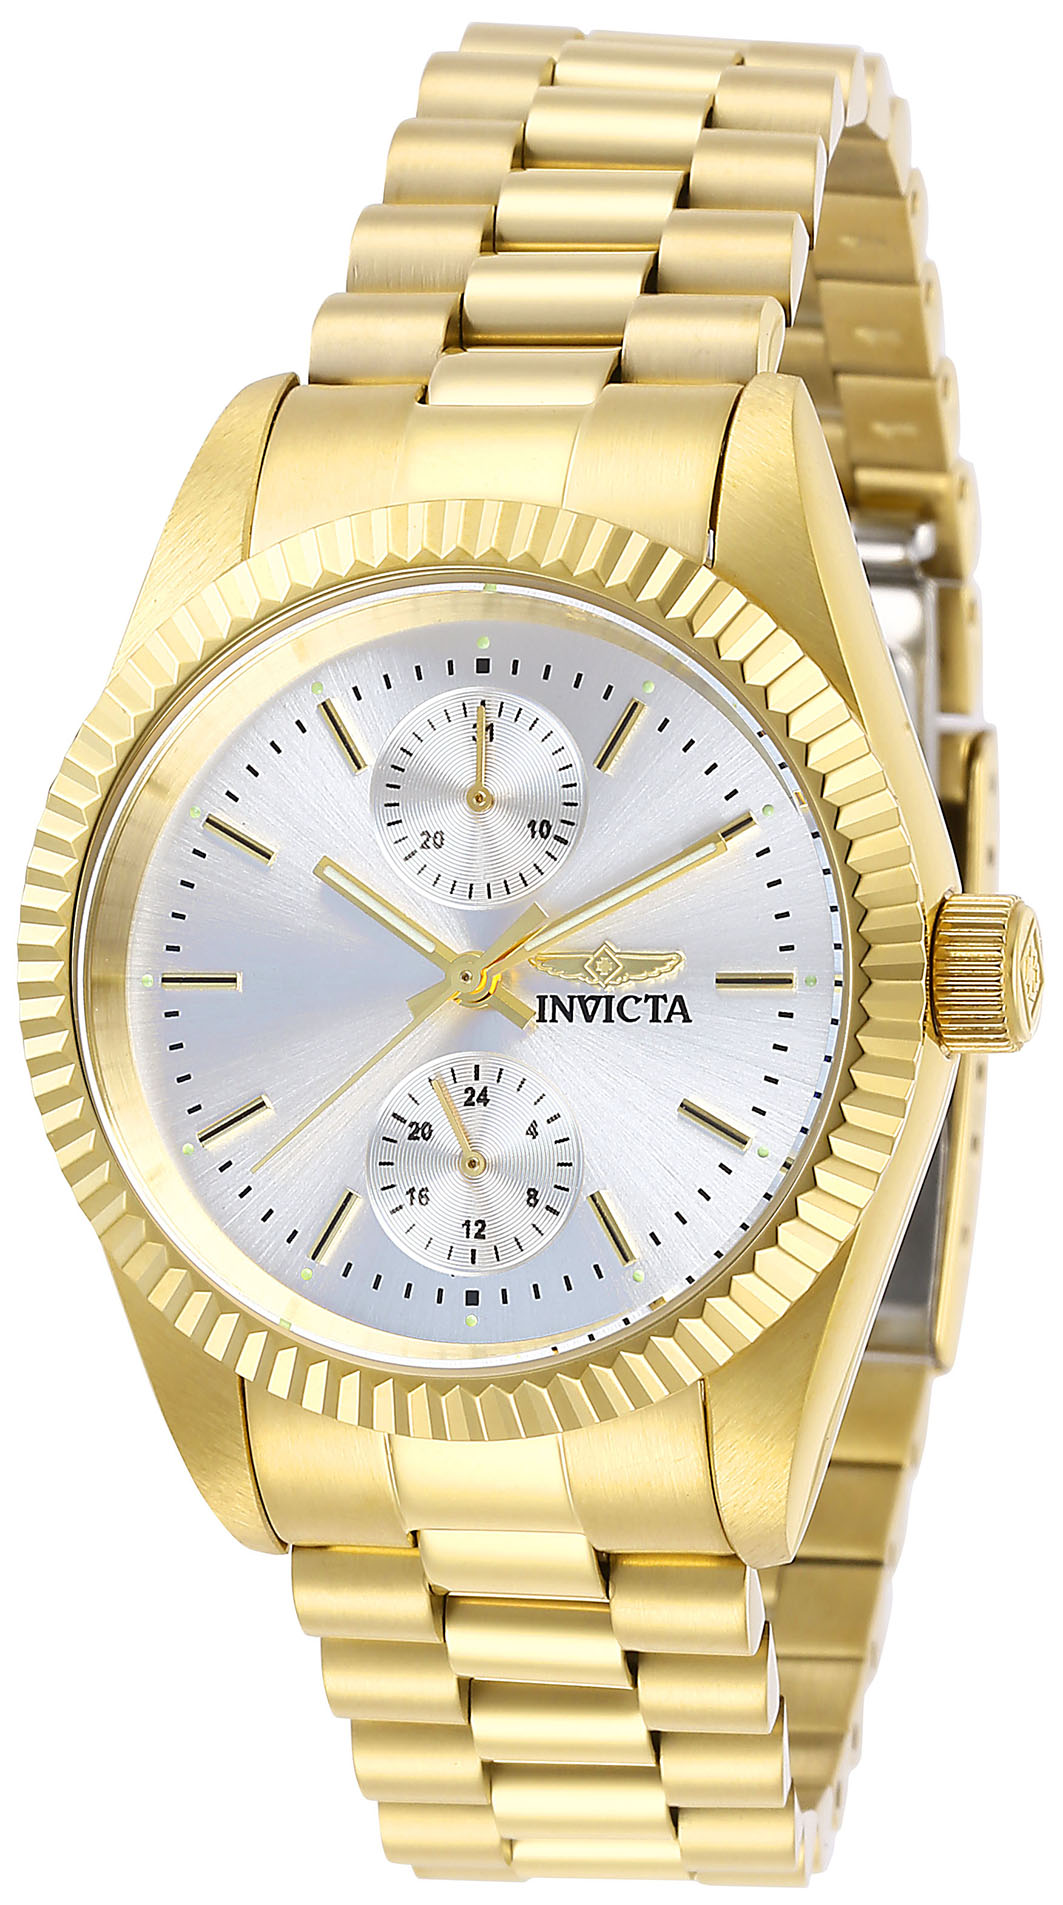 Invicta Specialty Women's Watch - 36mm, Gold (29445)